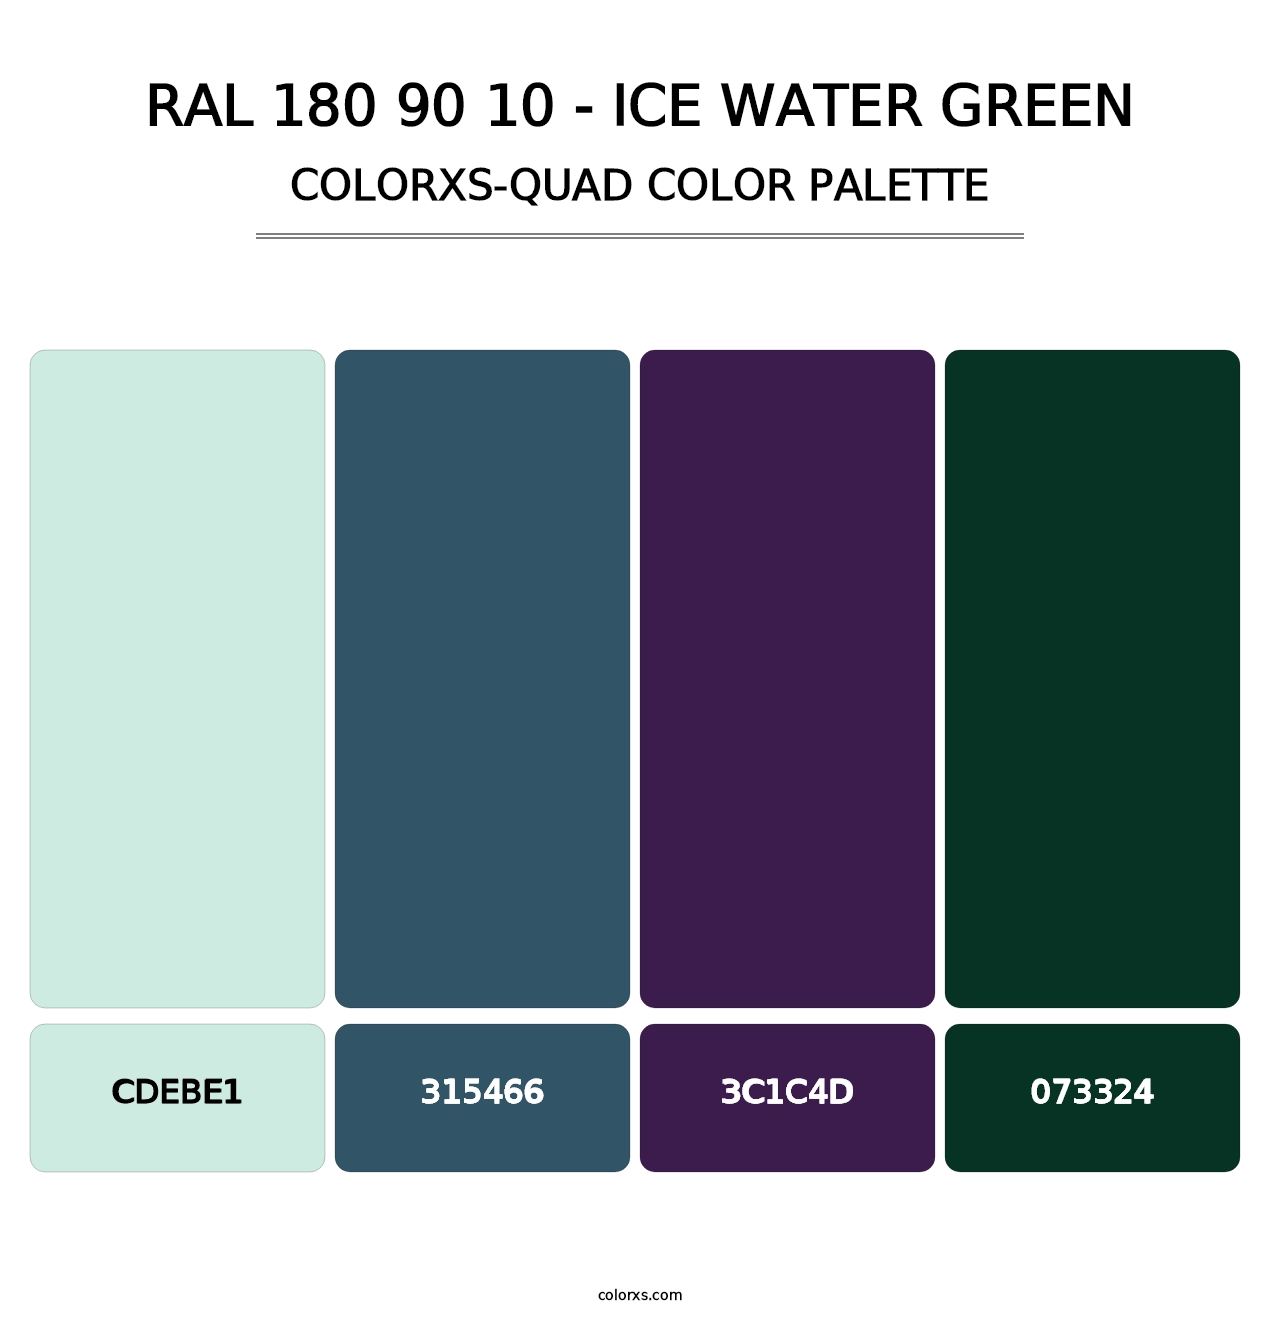 RAL 180 90 10 - Ice Water Green - Colorxs Quad Palette